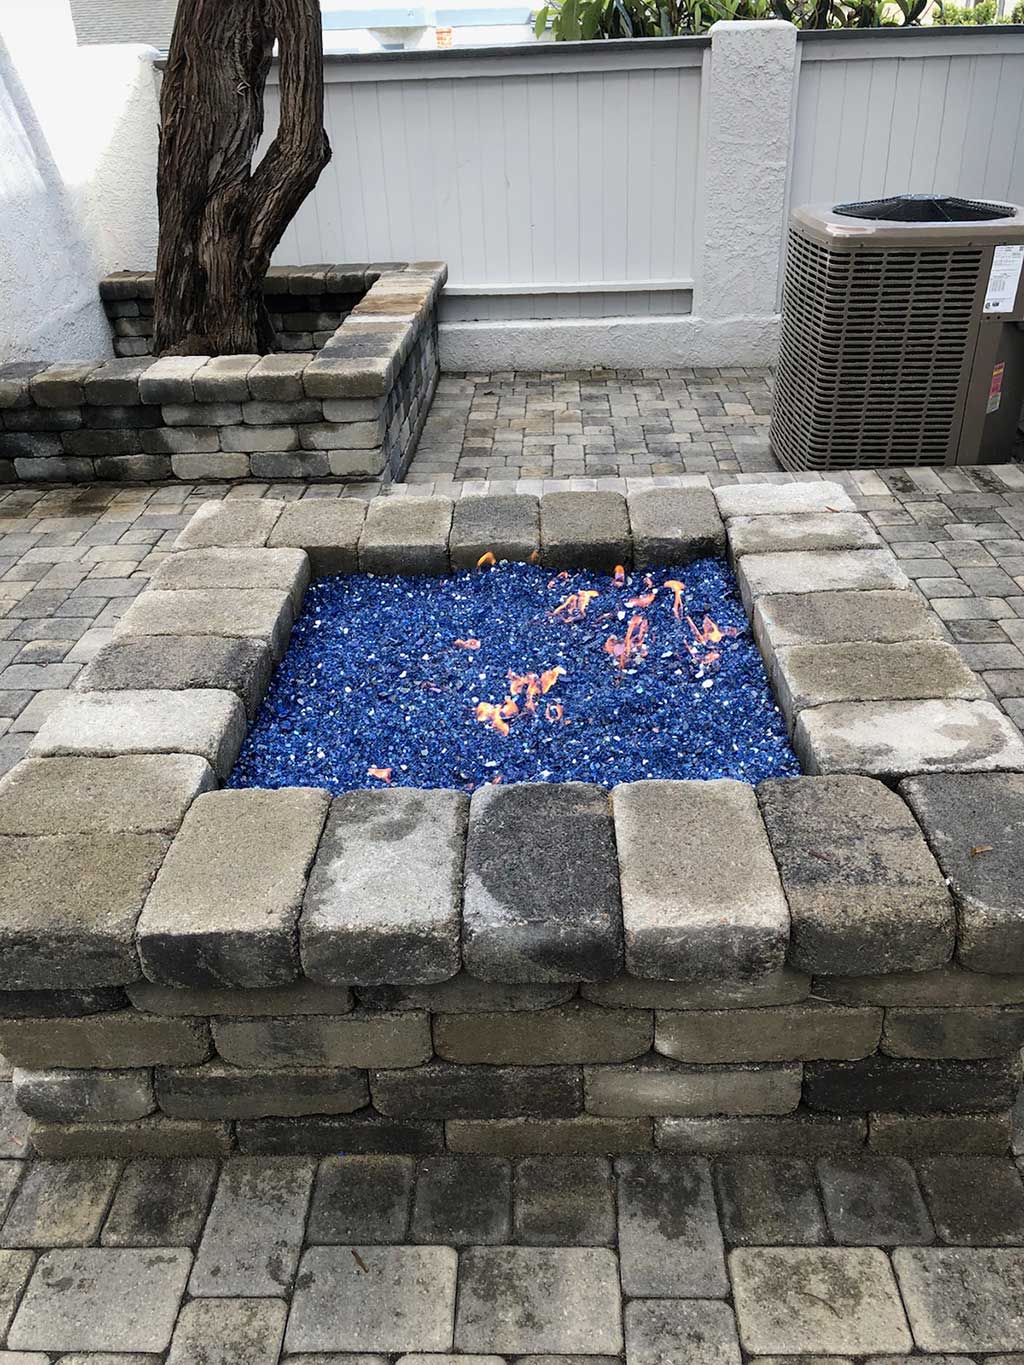 5 Reasons to Install Paver Outdoor Kitchen